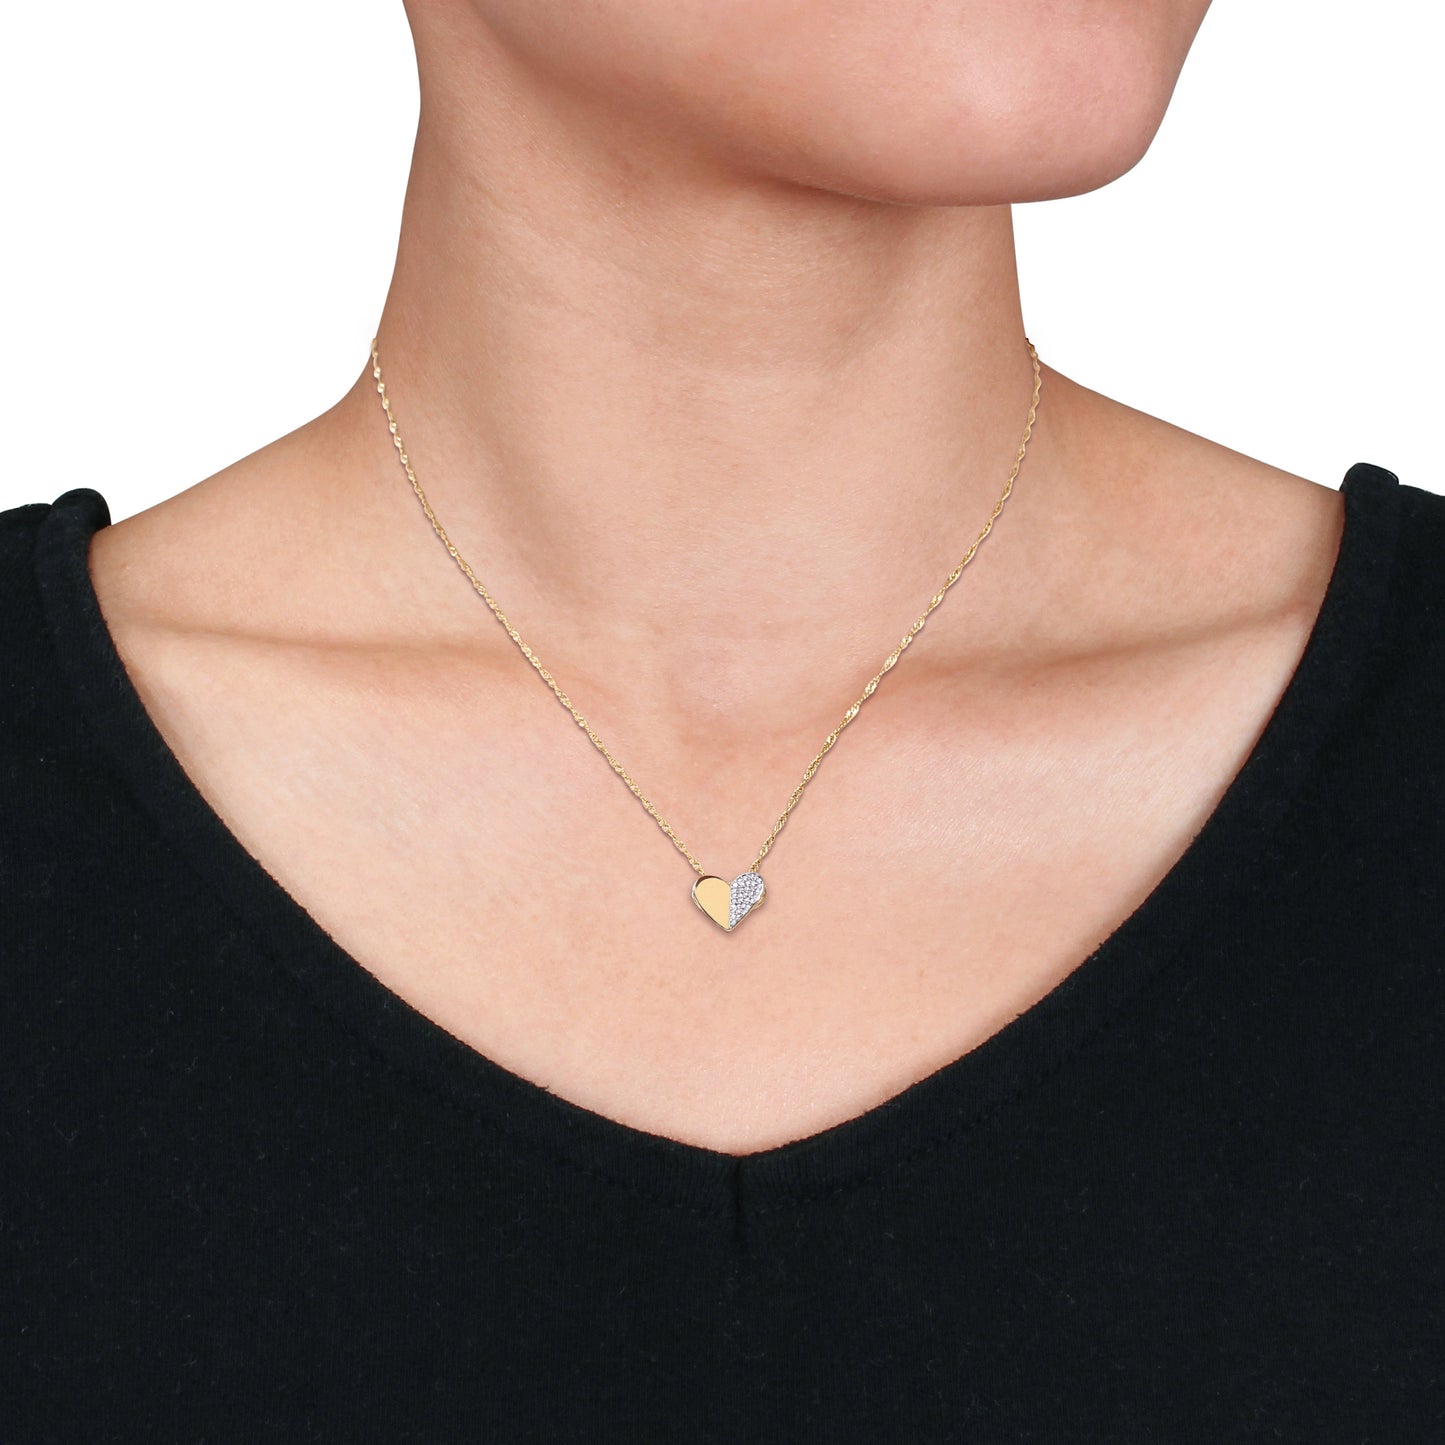 Mixed Media Heart Diamond Necklace in 10k Yellow Gold